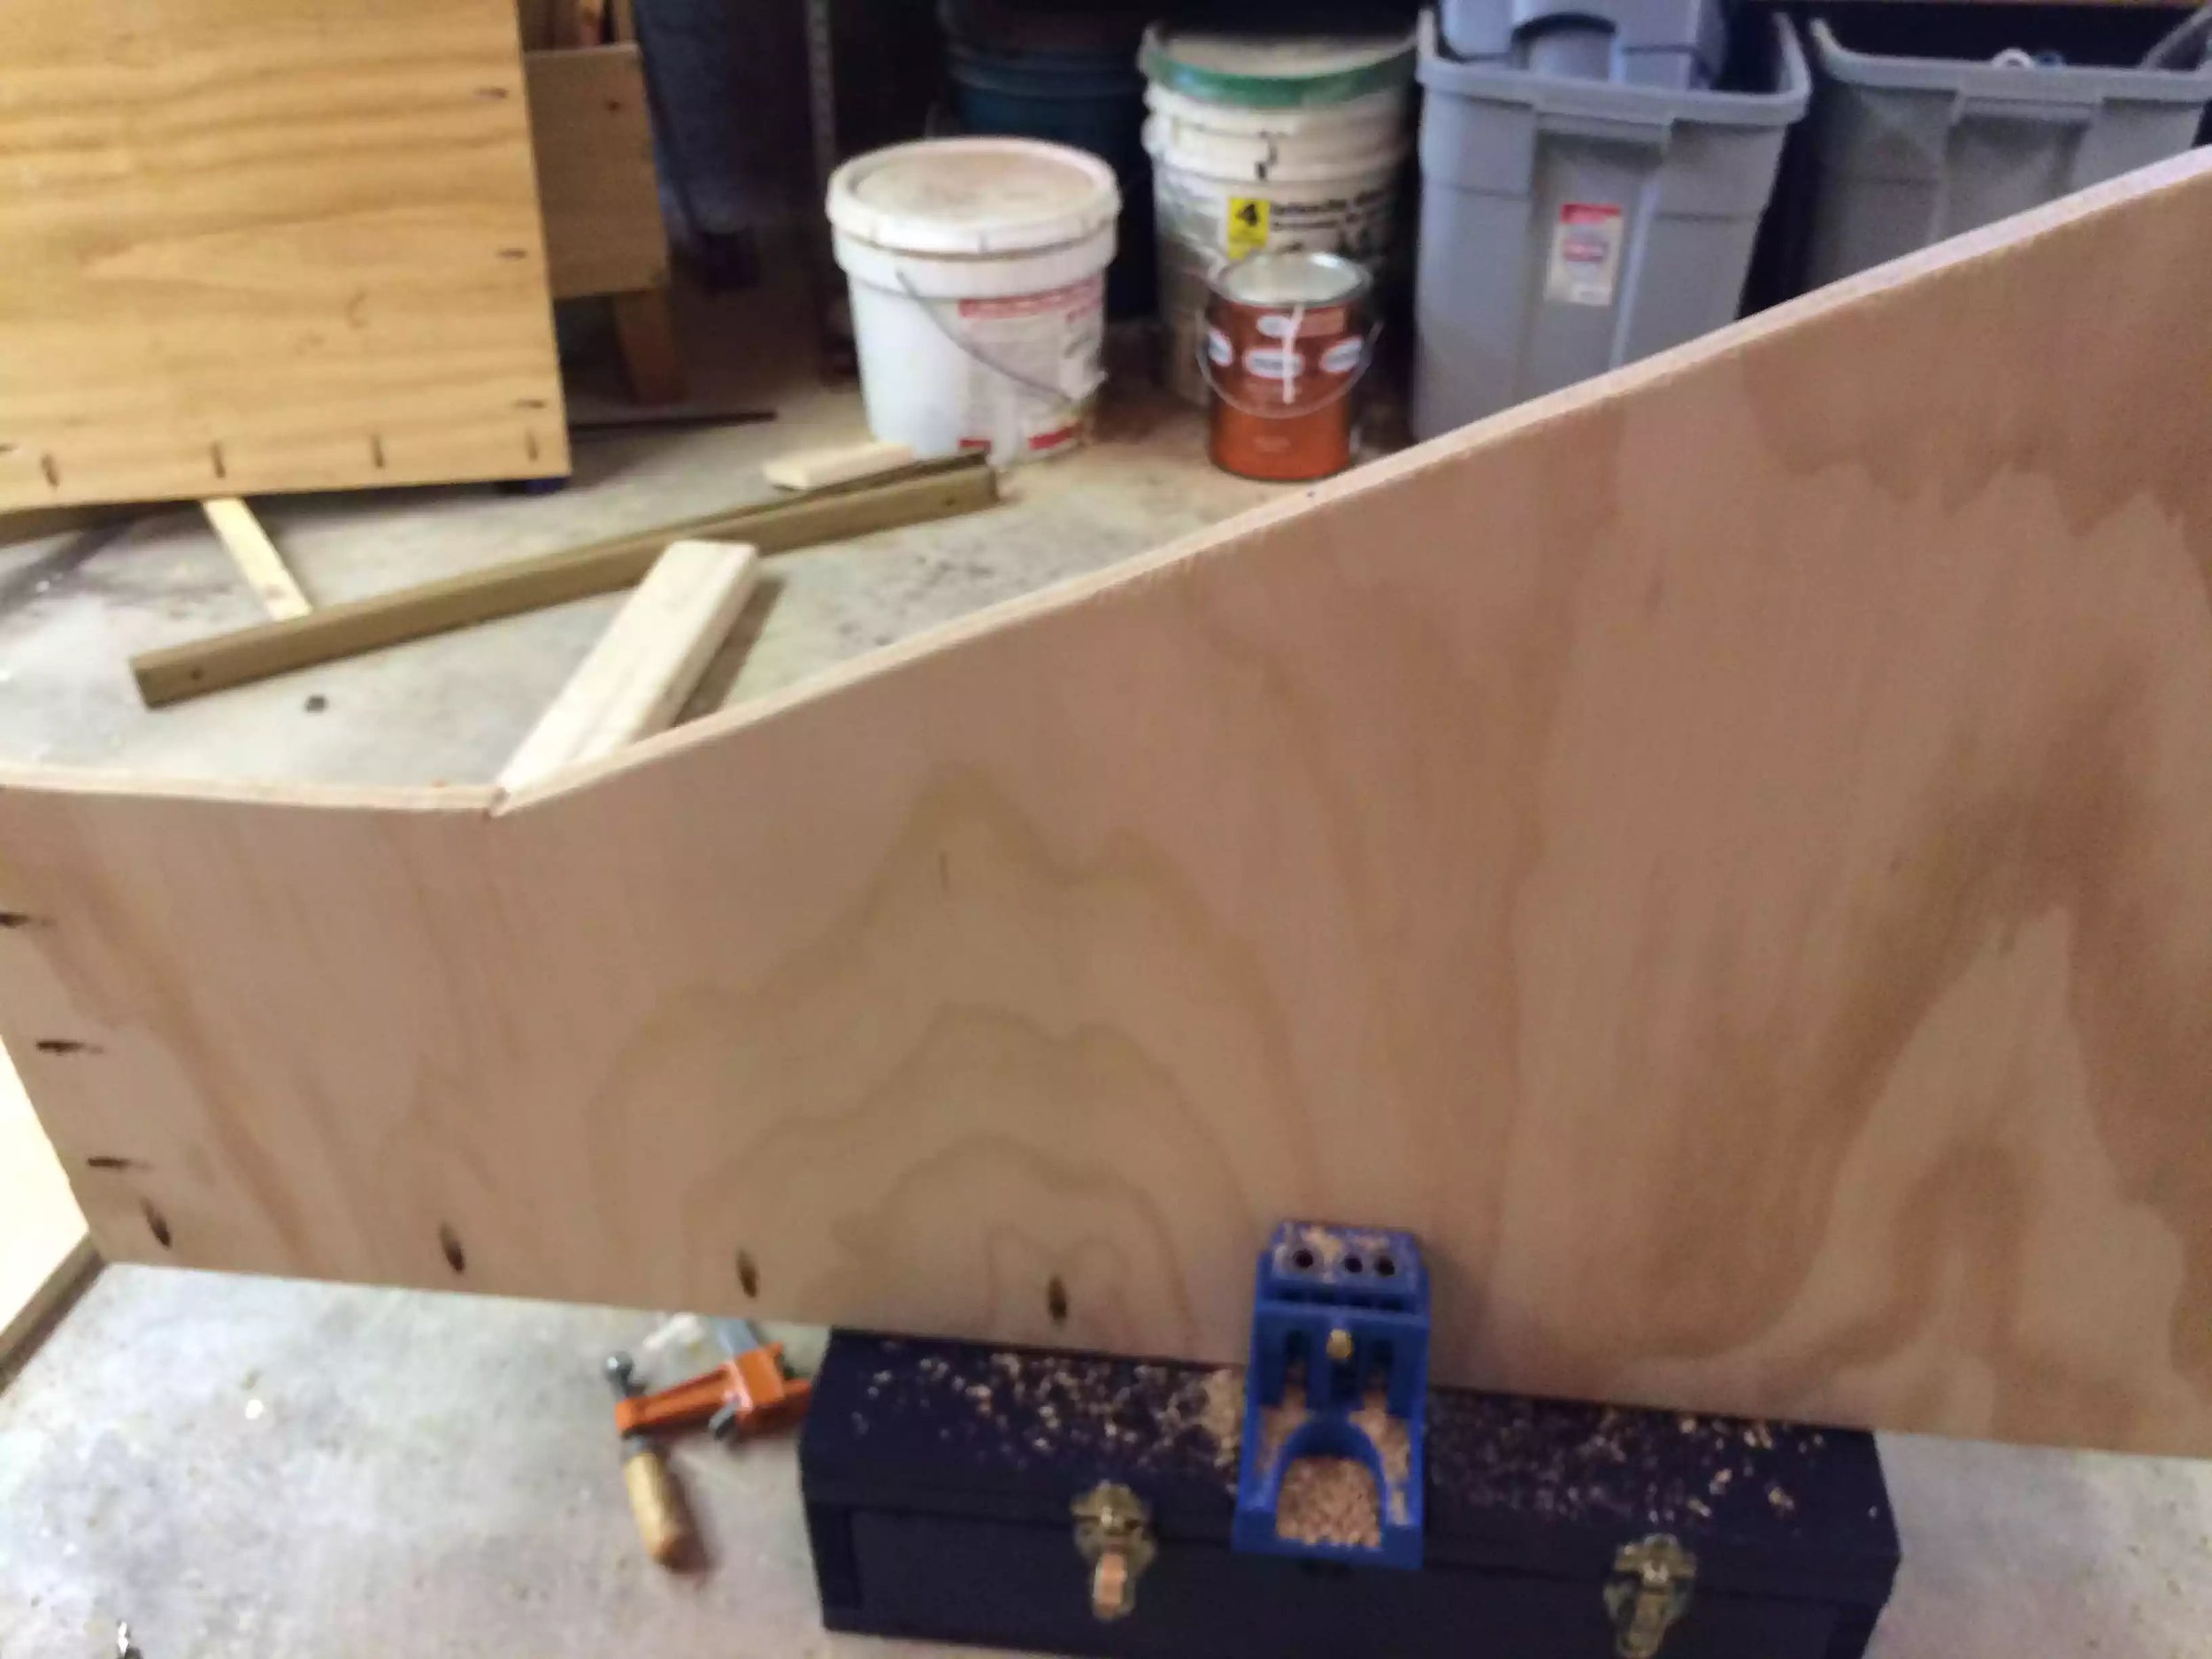 I used pocket hole joinery on this project